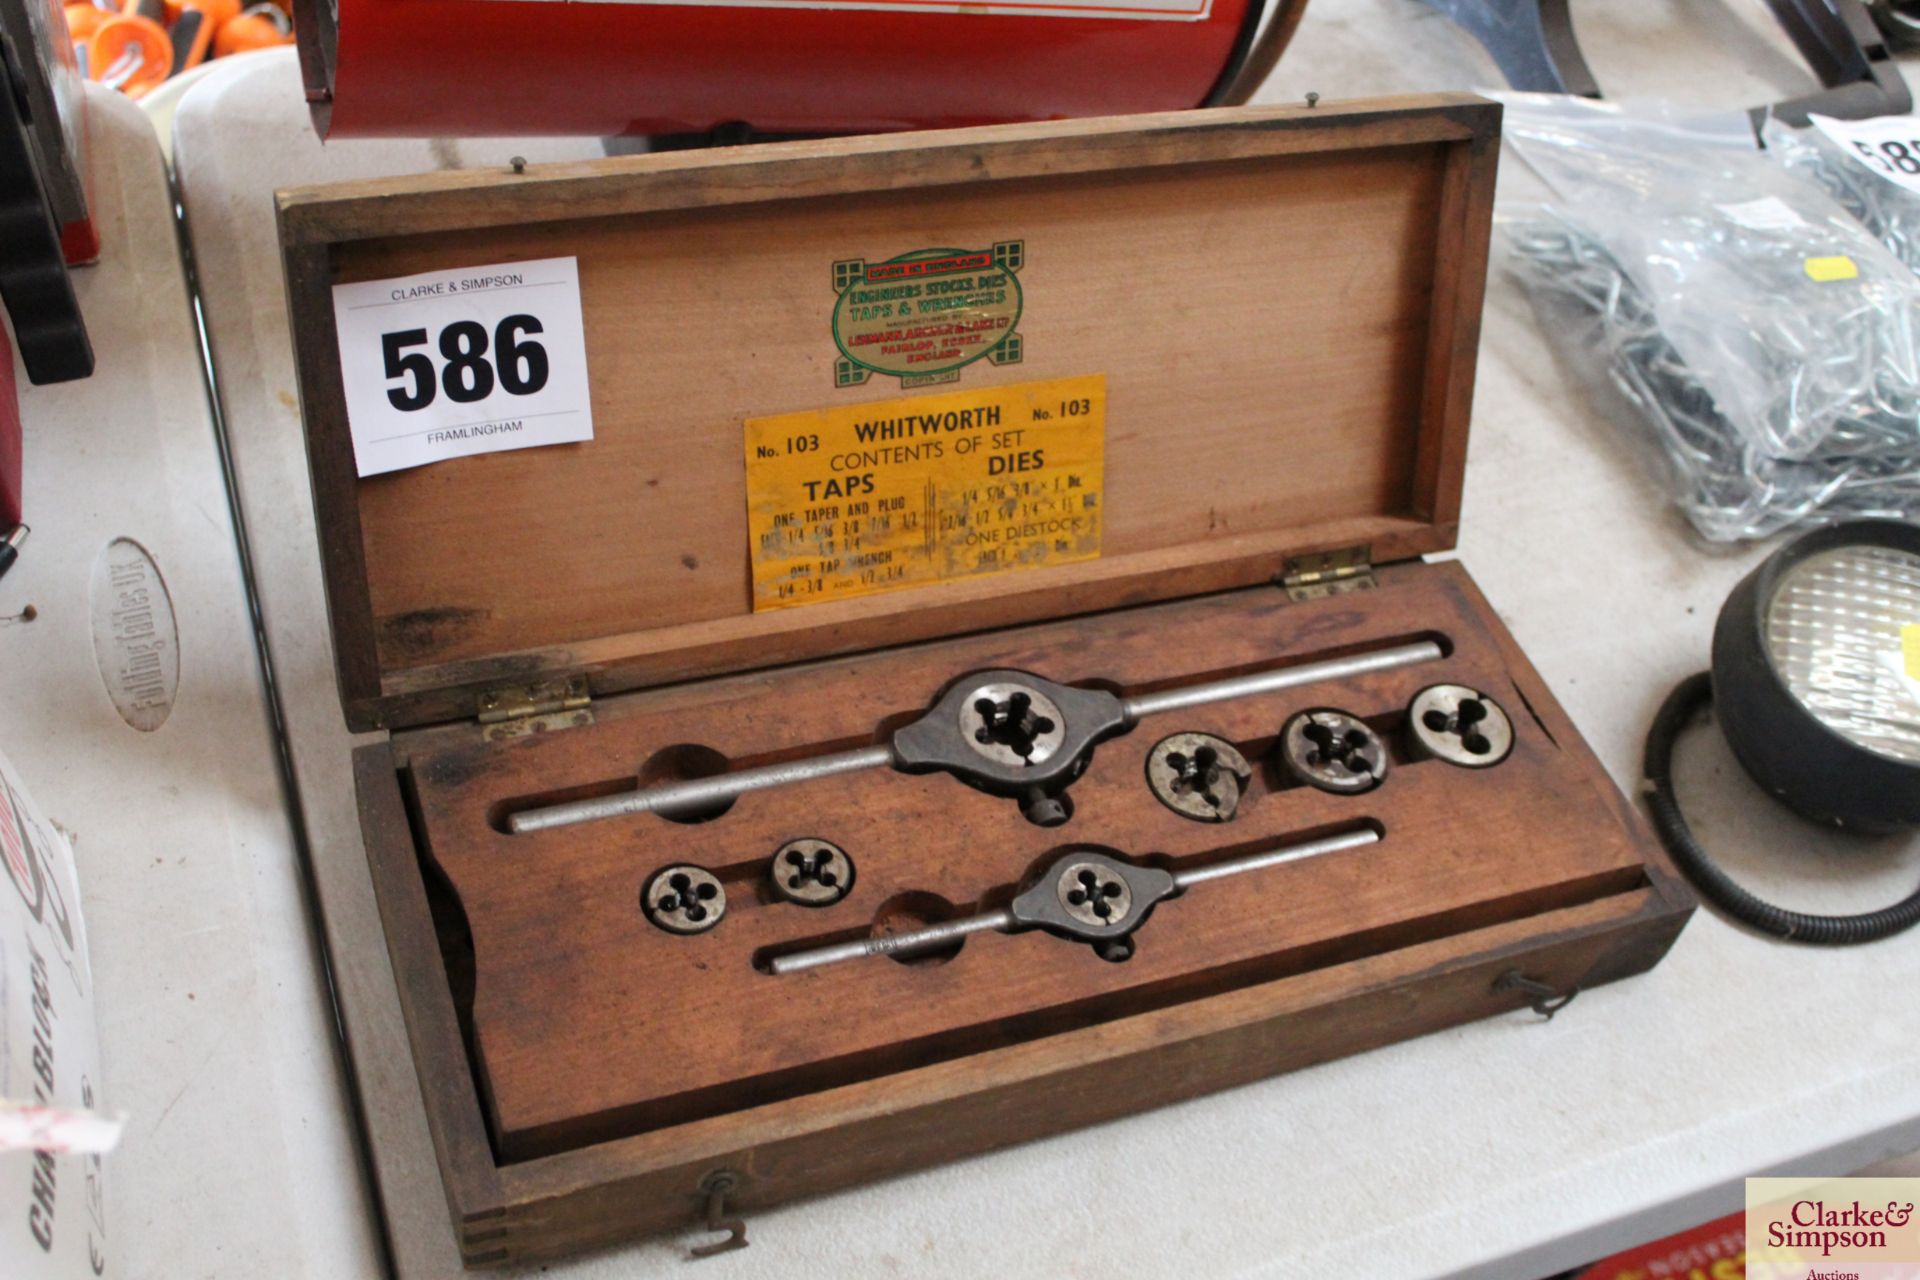 Whitworth tap and die set.